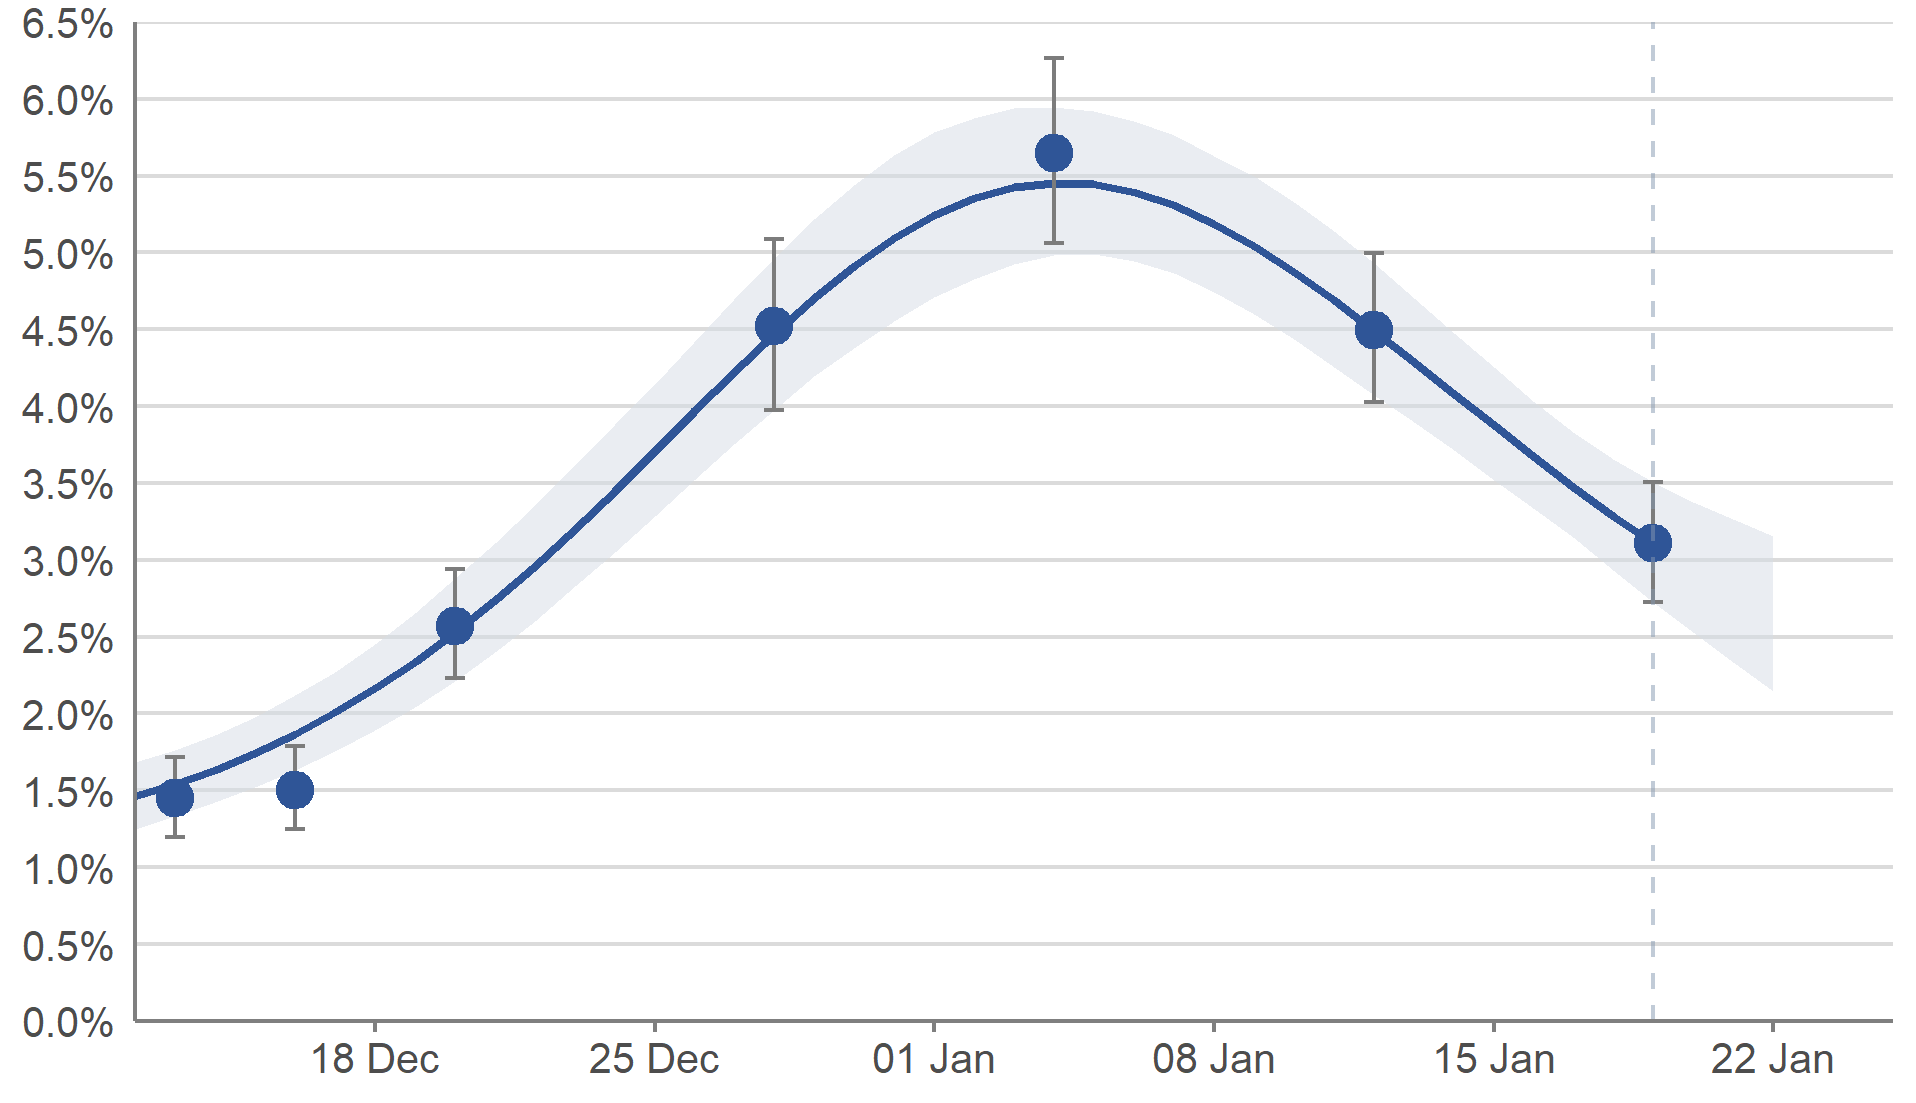 In Scotland, the percentage of people testing positive for COVID-19 peaked on 4 January 2022. The percentage of people testing positive continued to decrease in the most recent week.